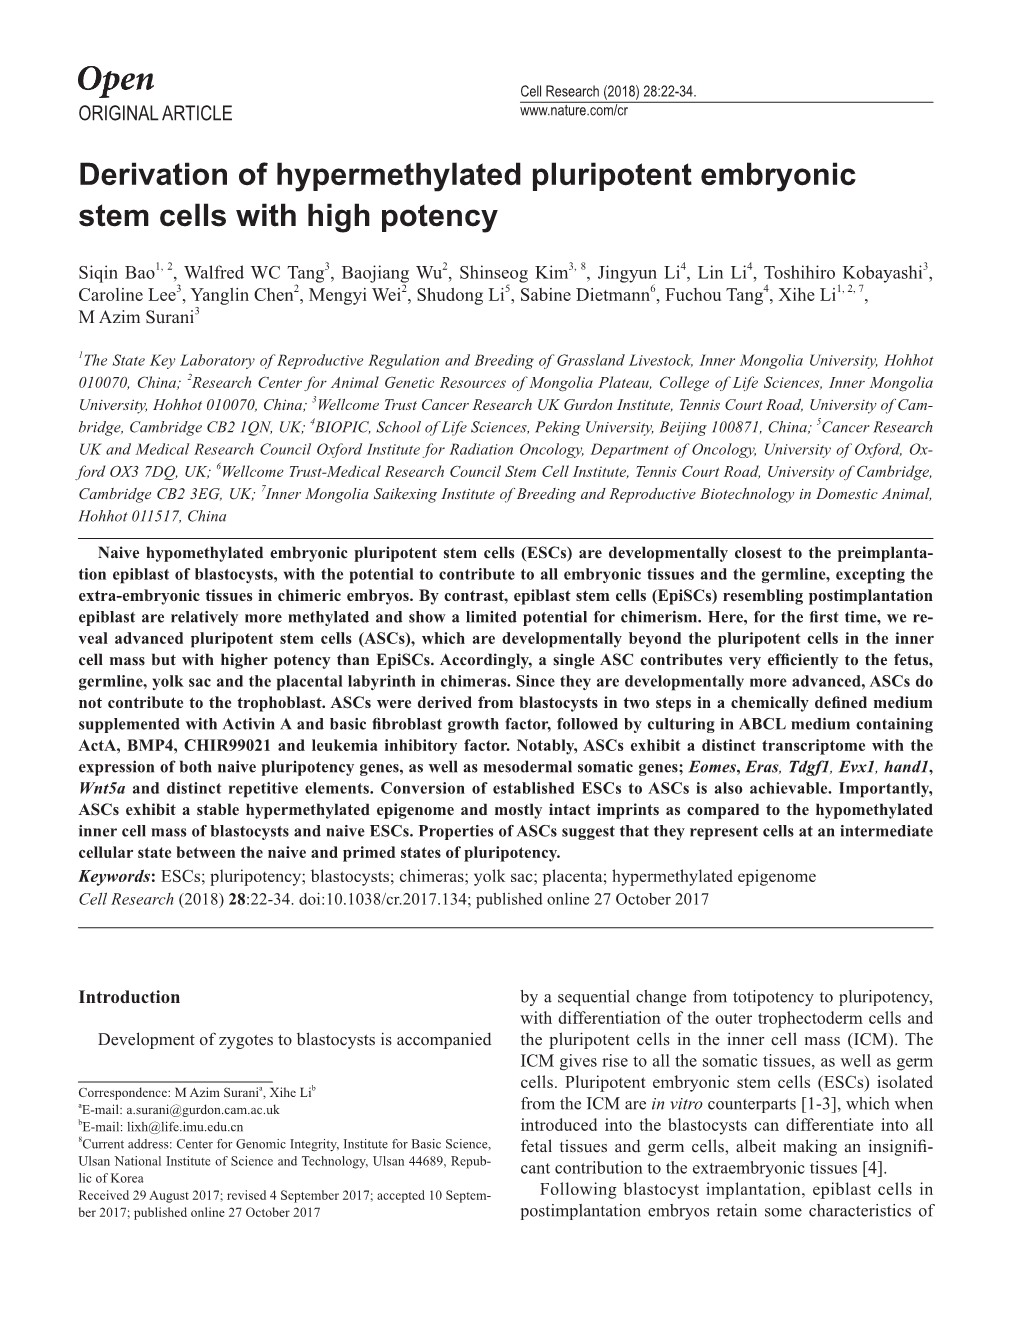 Derivation of Hypermethylated Pluripotent Embryonic Stem Cells with High Potency